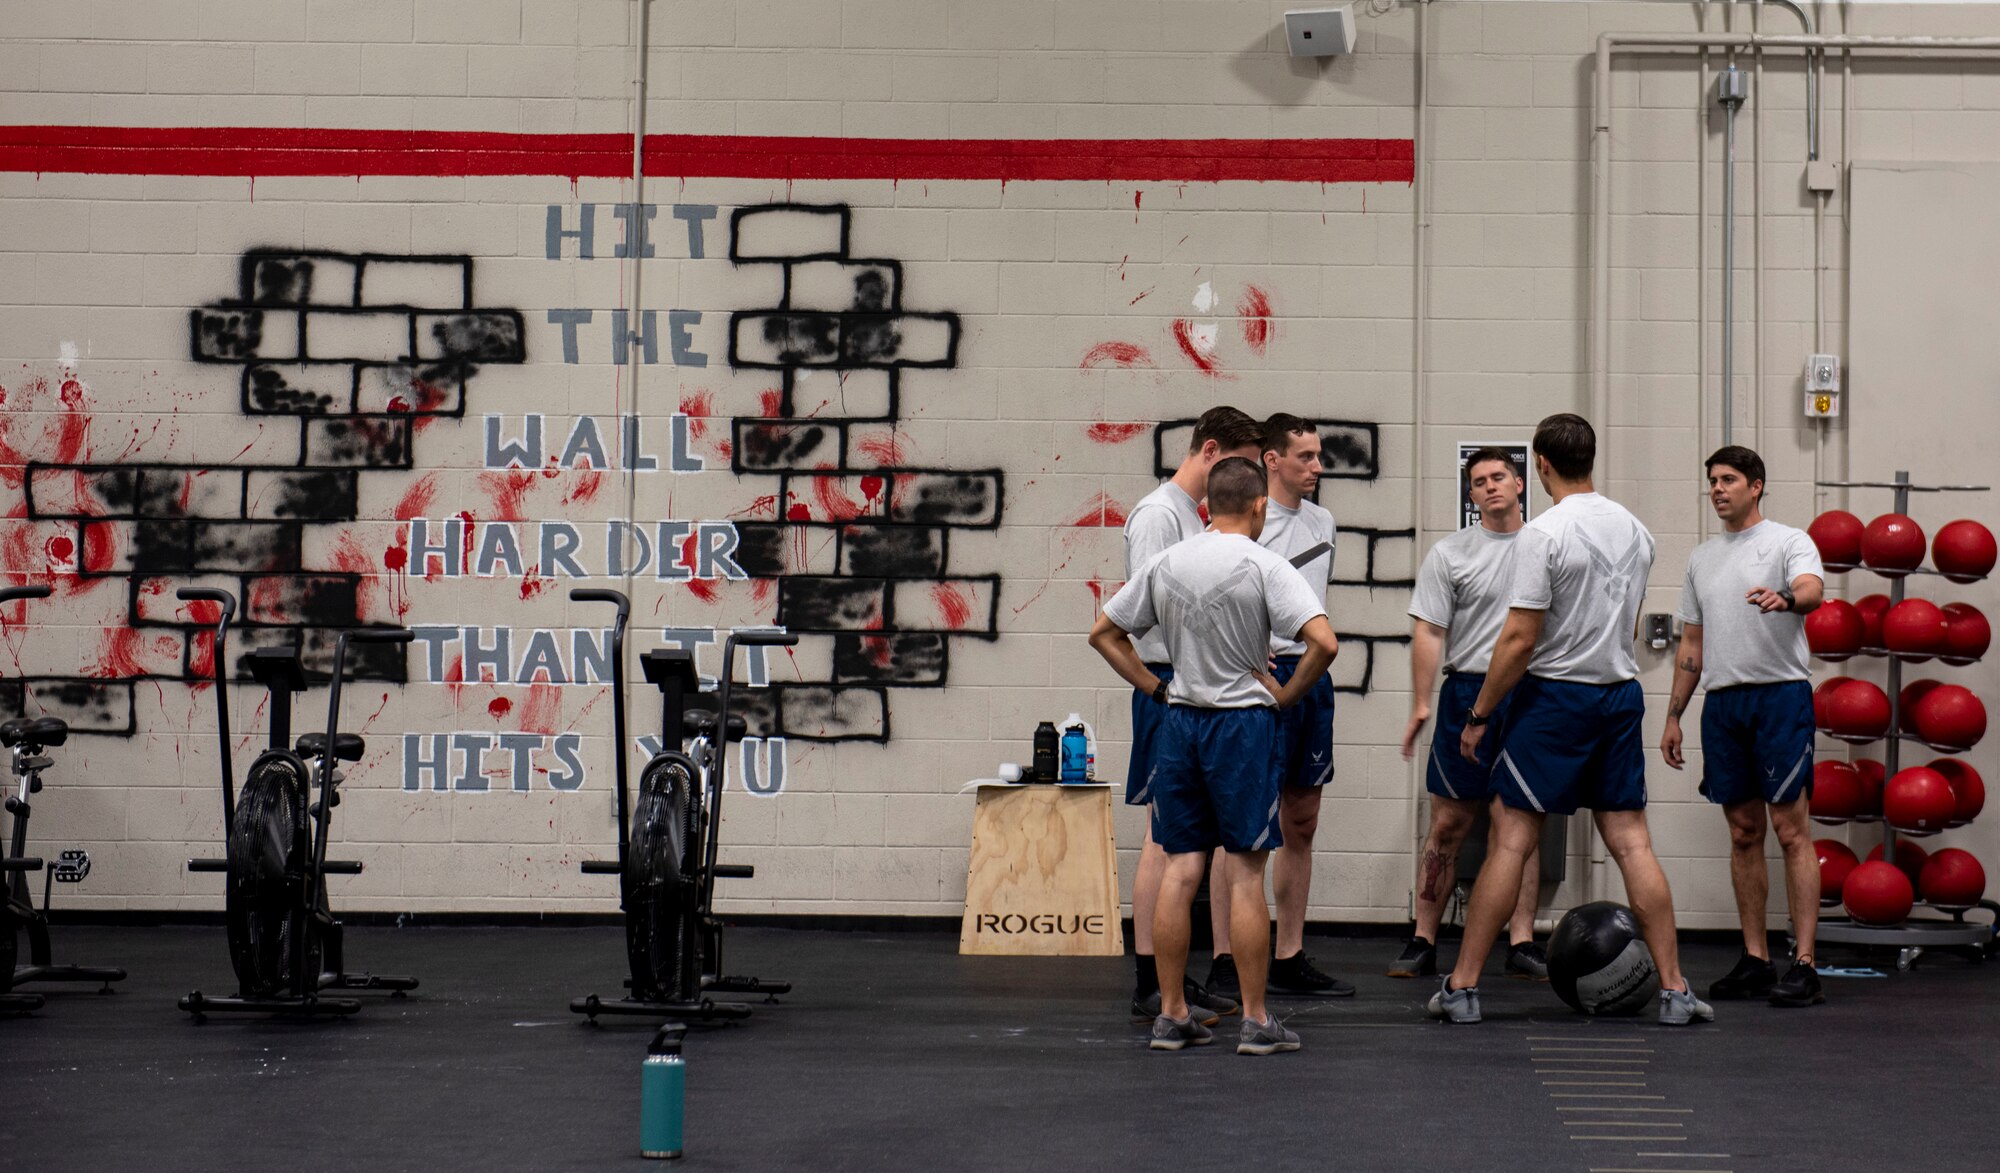 The 20th Civil Engineer Squadron, Explosive Ordnance Disposal (EOD) flight Airmen gather for a team pep-talk as they train for the new Tier 2 physical fitness test at Shaw Air Force Base, South Carolina, Oct. 4, 2019.